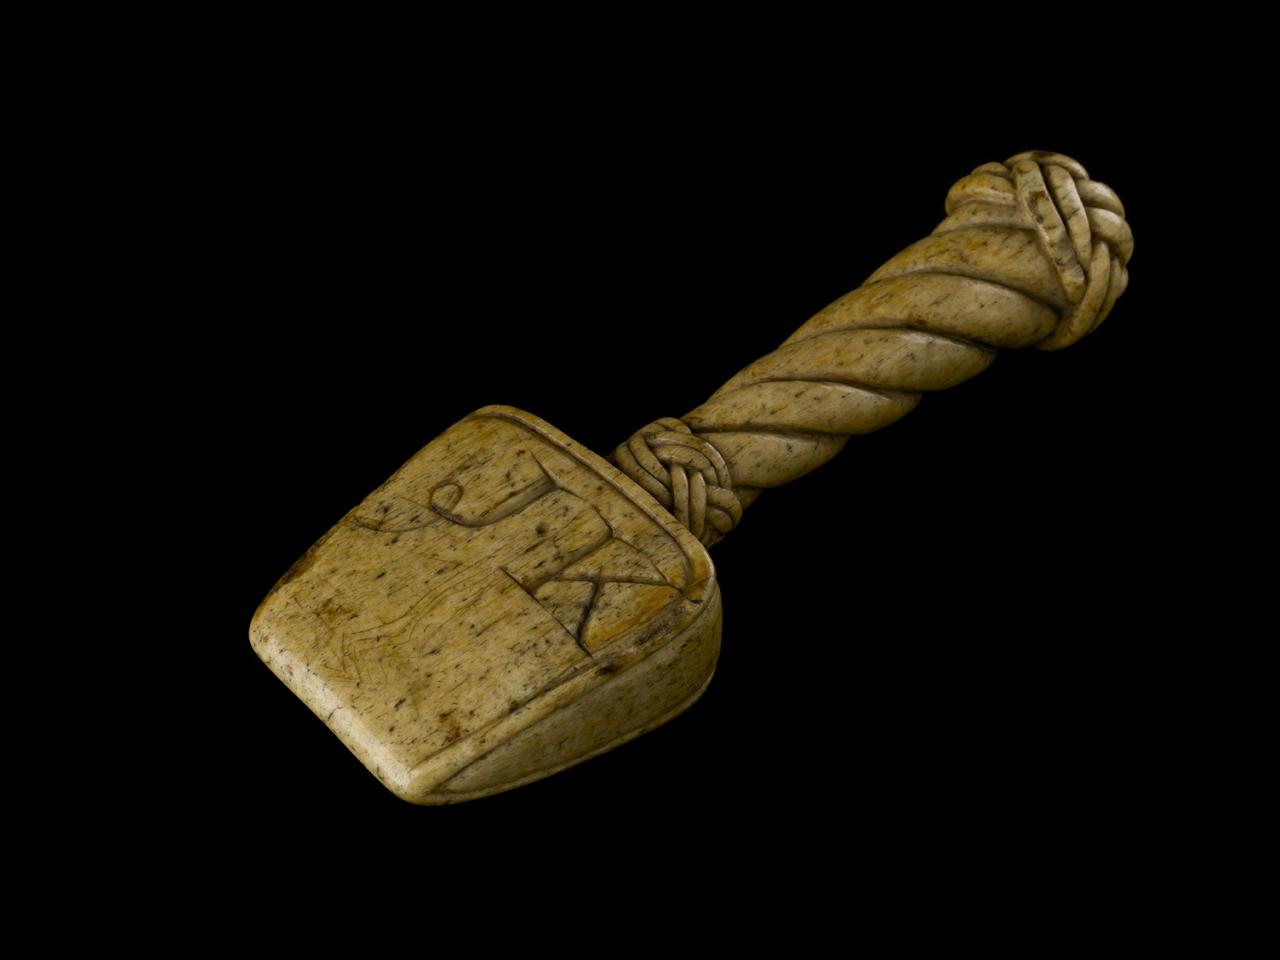 A wooden tool with initials carved on it